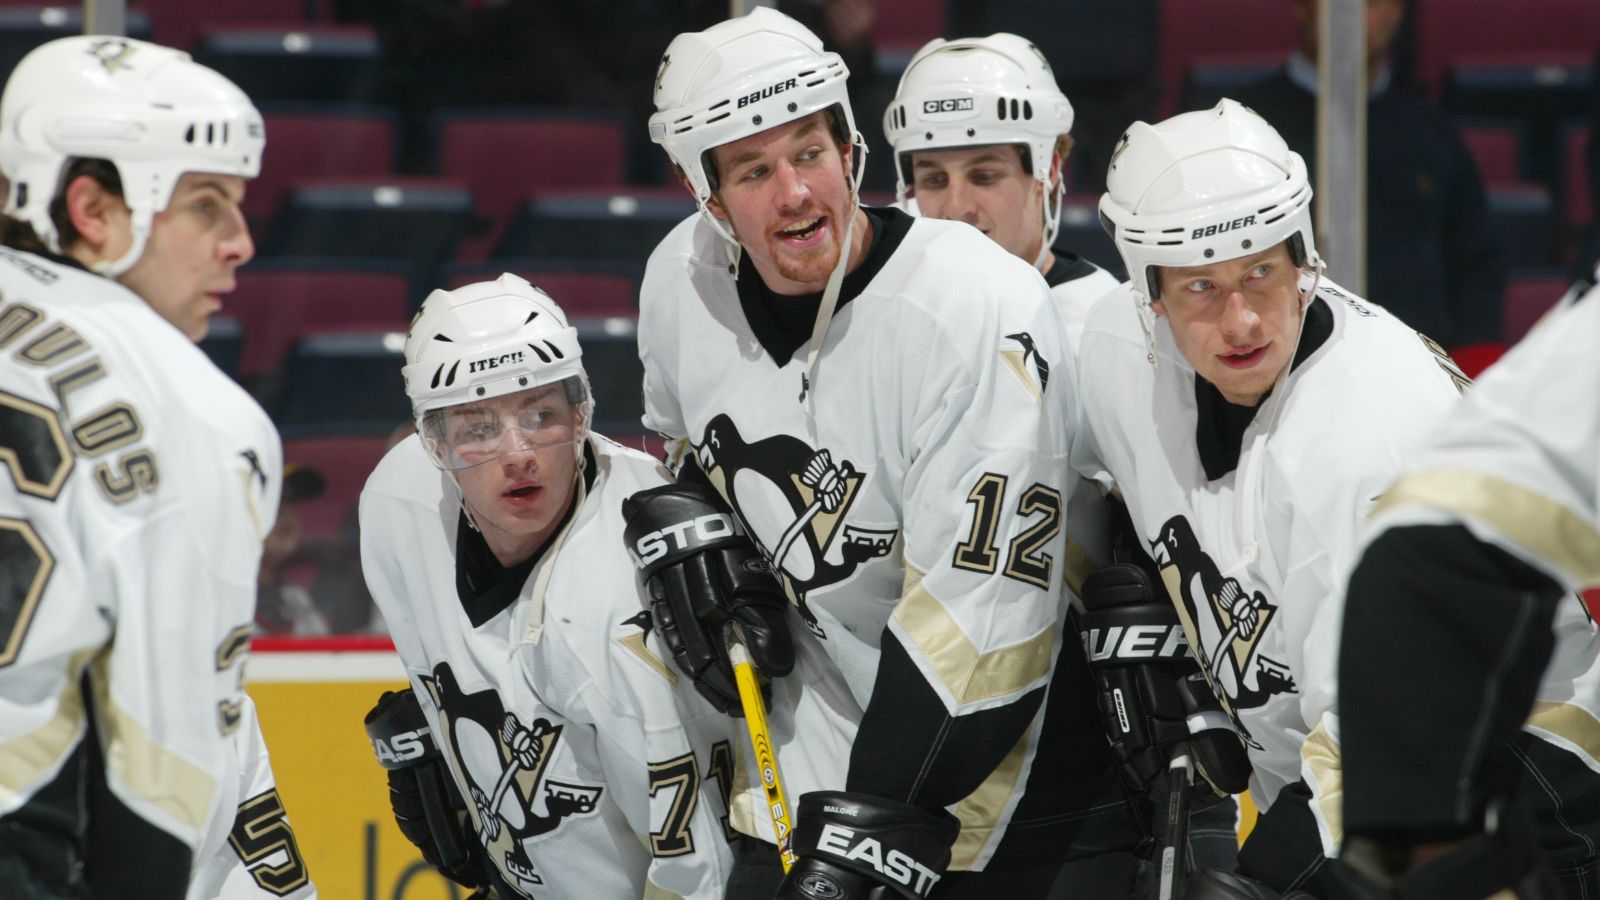 PittsburghHockey.net on X: #OTD in @Penguins history: 2003 - Marc-Andre  Fleury stopped 46 shots - including an Esa Pirnes penalty shot - in his  first NHL game. Ryan Malone became the first